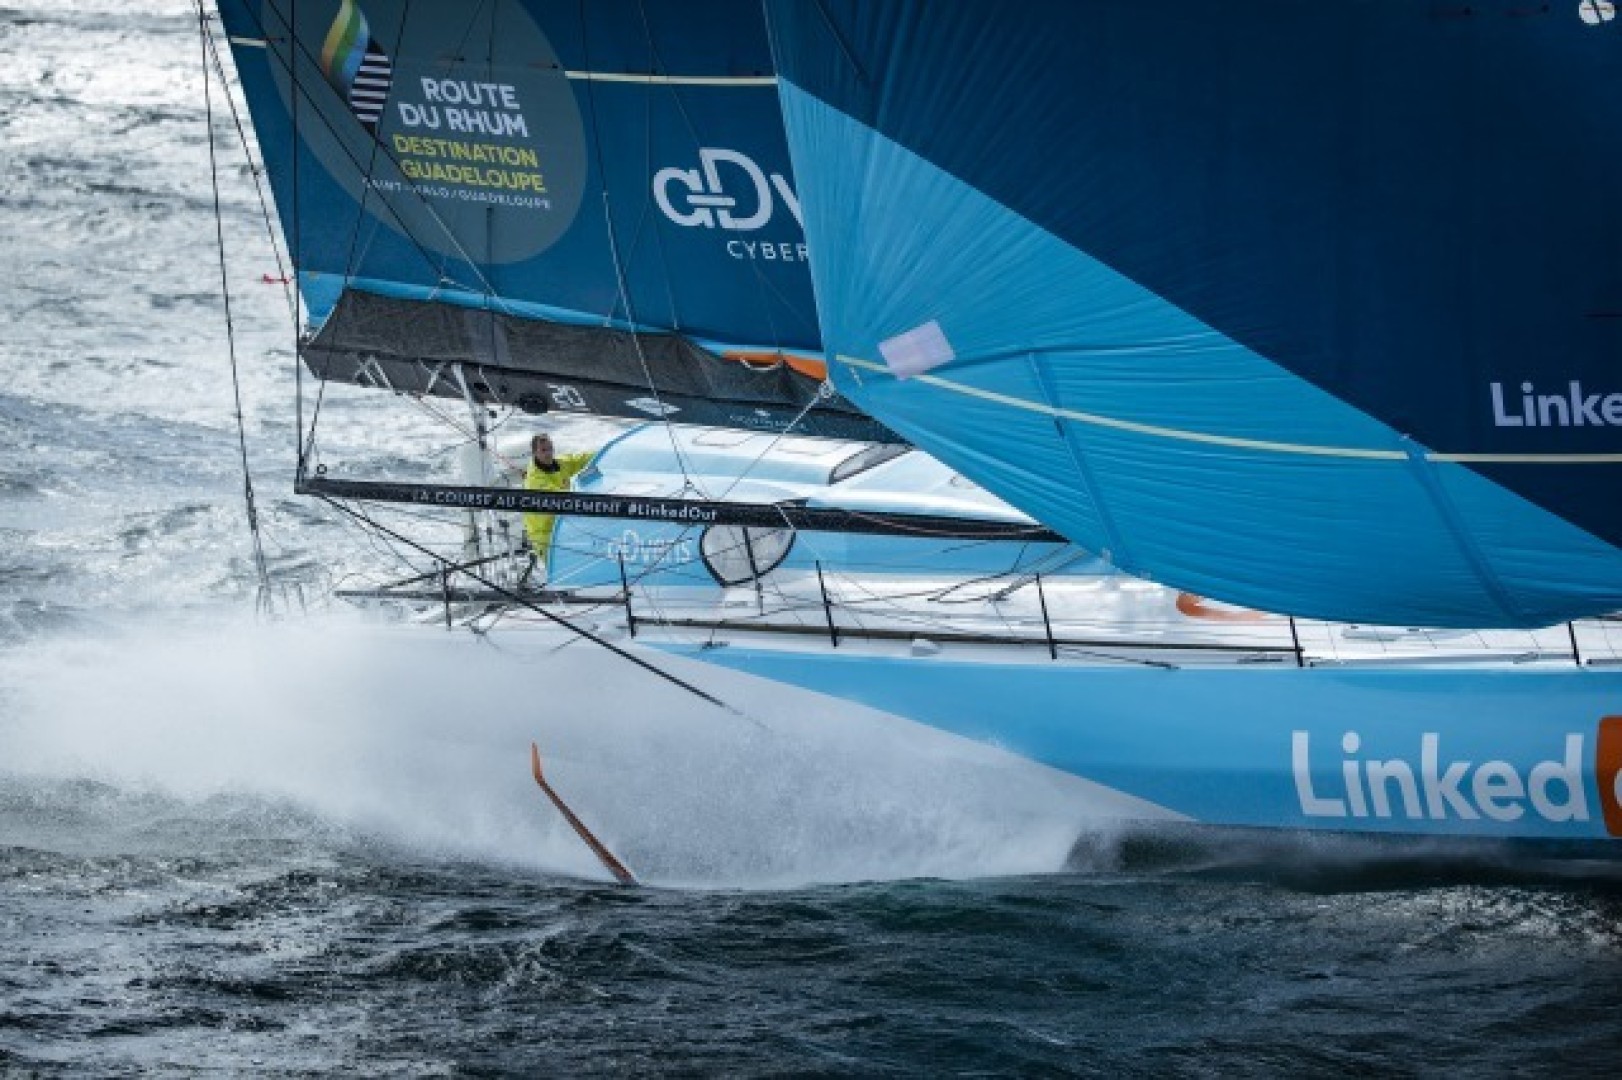 Thomas Ruyant wins RDR Imoca Class in new record time